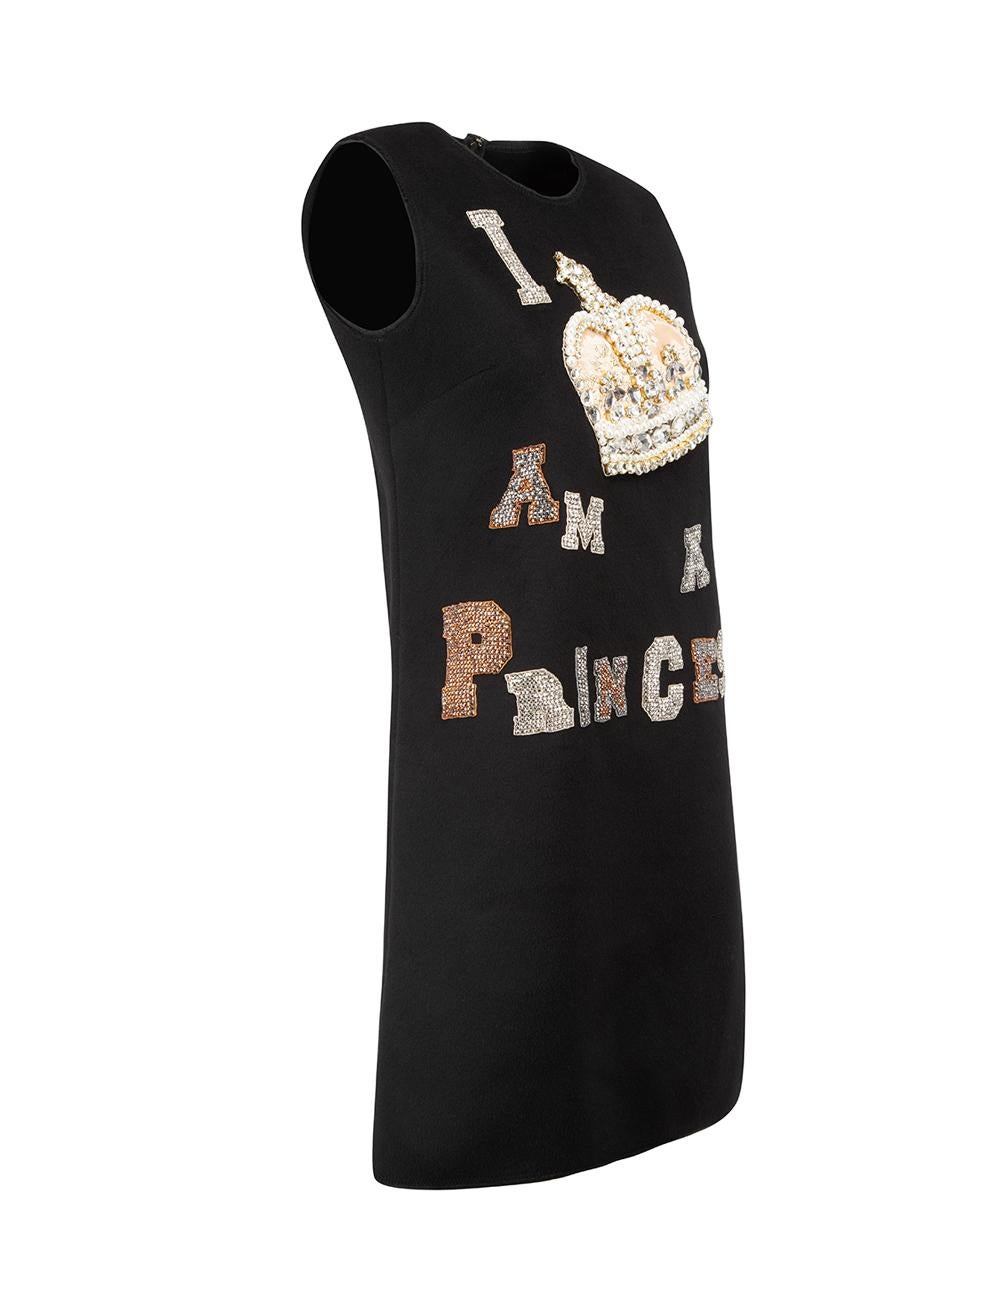 CONDITION is Never worn, with tags. No visible wear to dress is evident on this new Dolce & Gabbana designer resale item.



Details


Black

Wool

Shift mini dress

Loose fit

Sleeveless

'I AM A PRINCESS' crystal embellishment

Zip fastening on